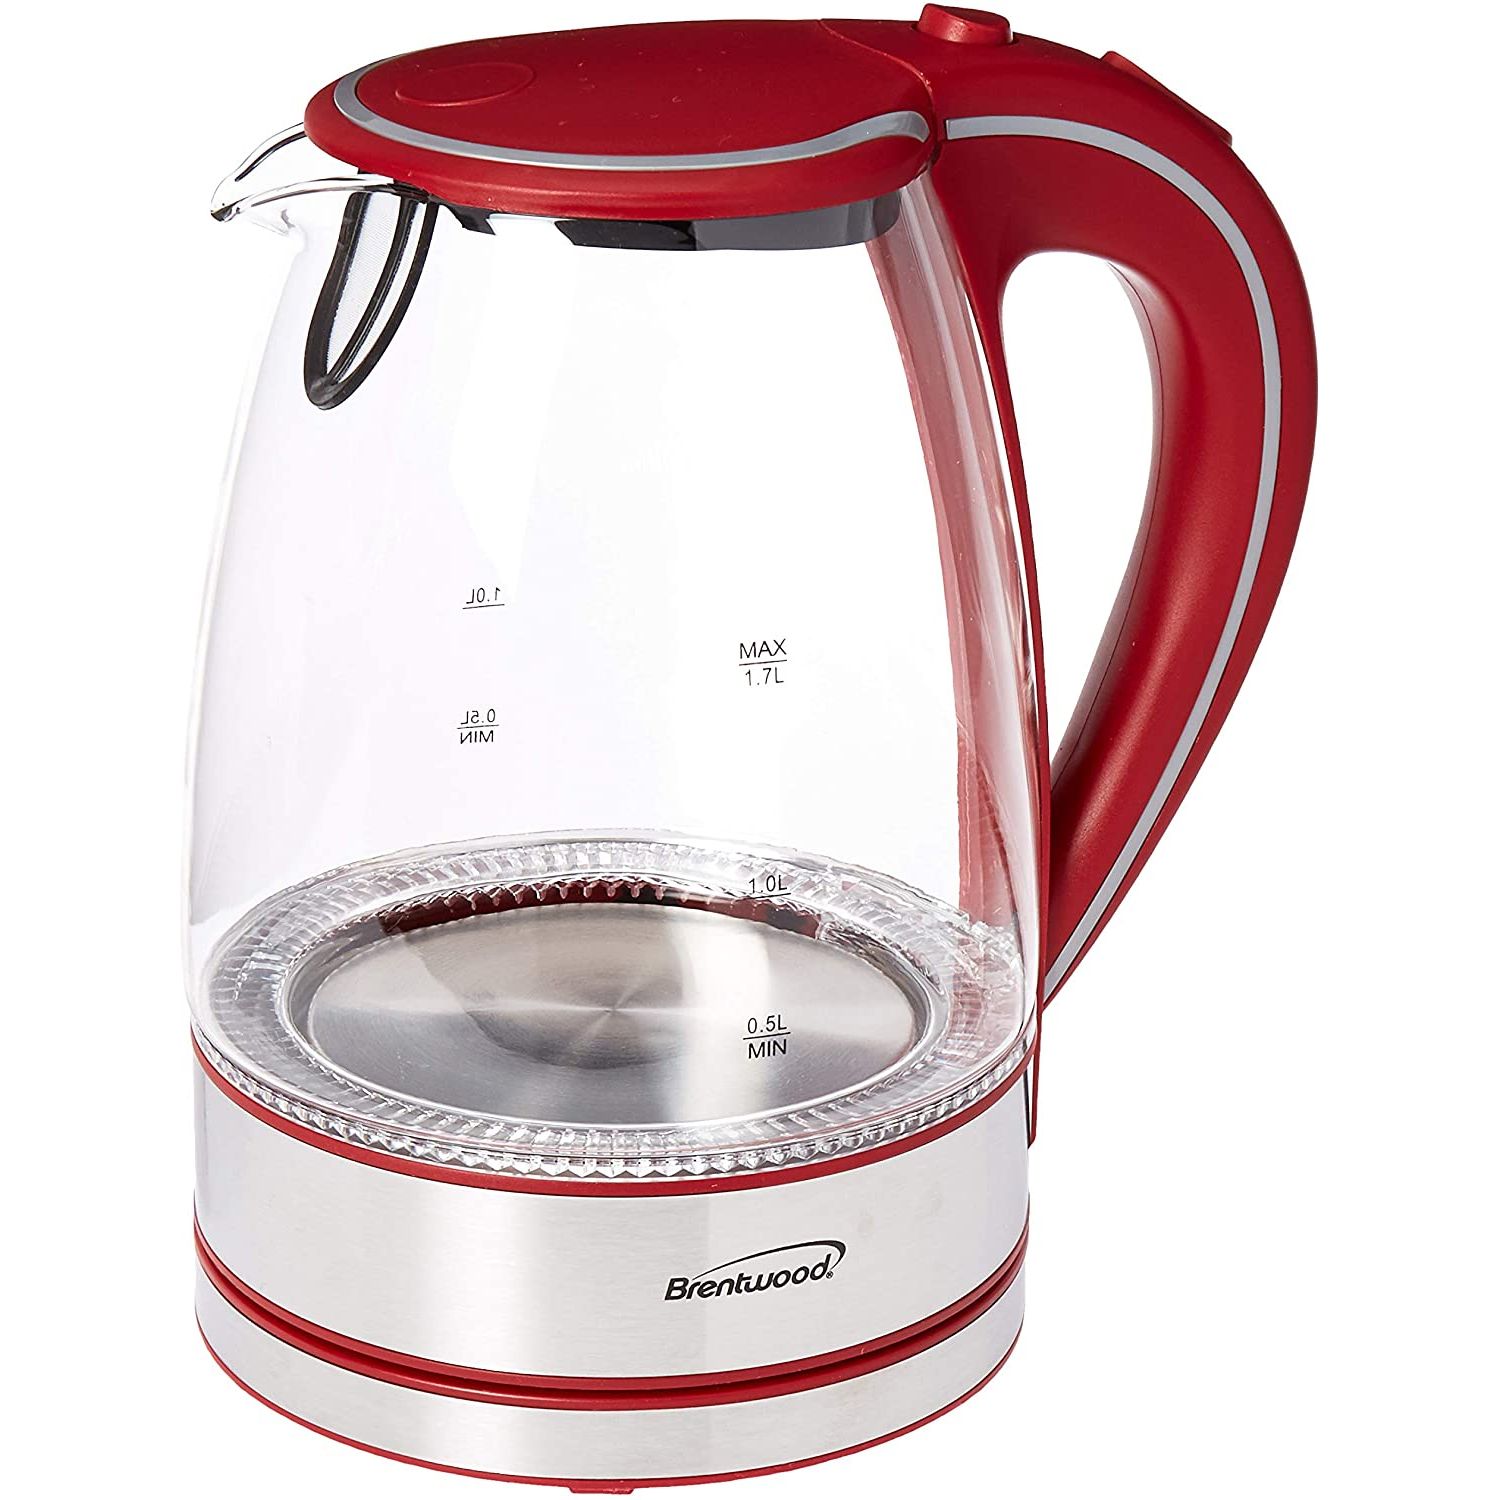 Better Chef 1.7 Liter 360 Degree Glass Cordless Electric Kettle